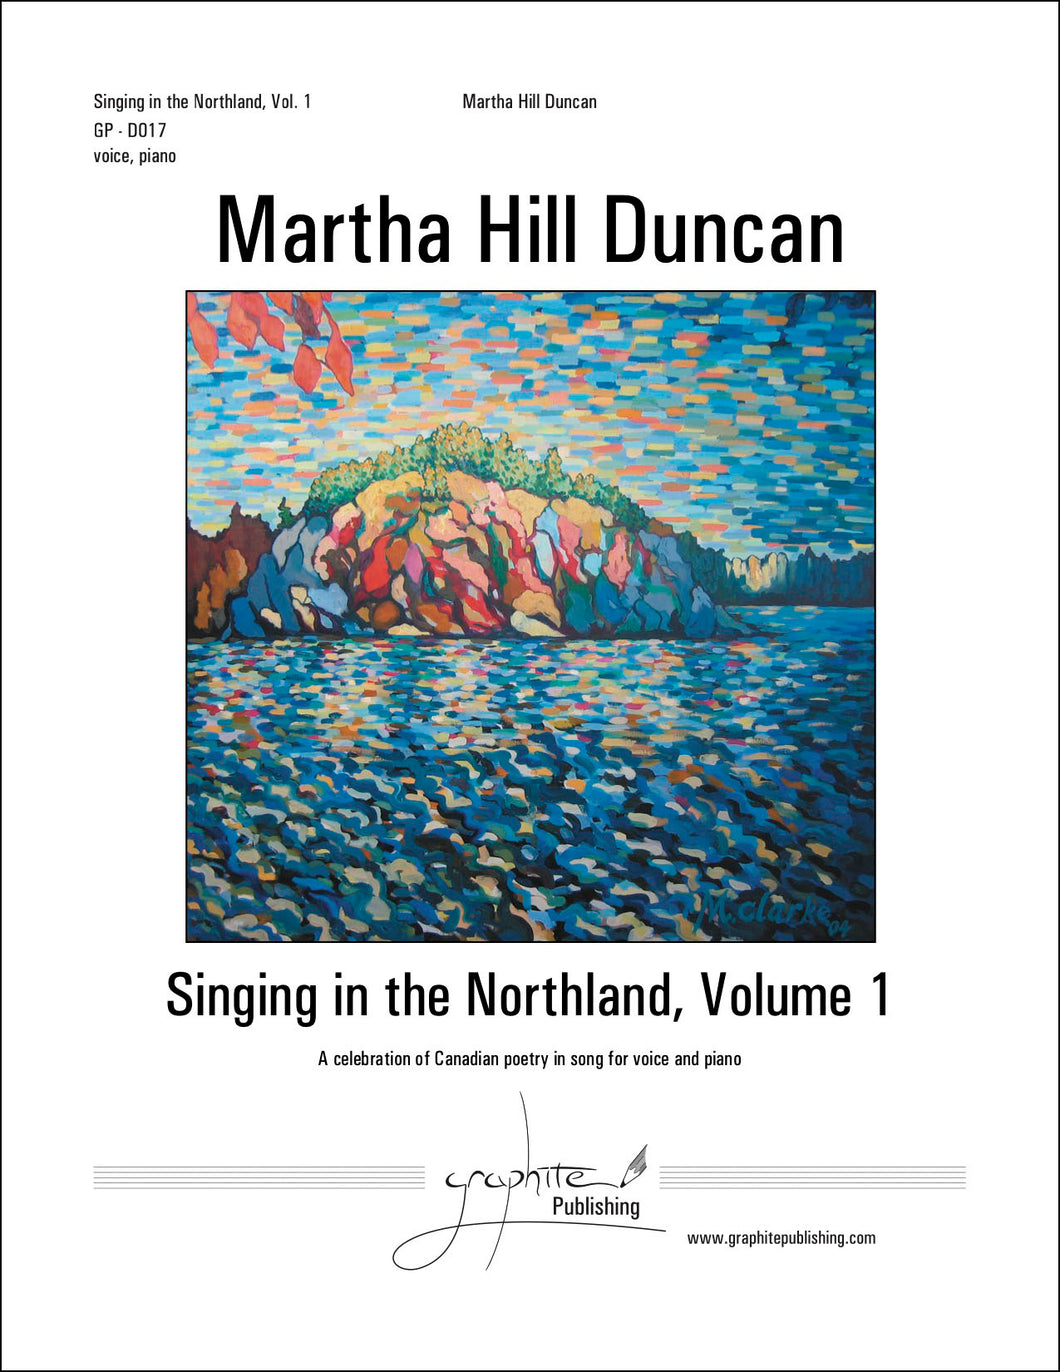 Cover Image for Singing in the Northland Volume 1